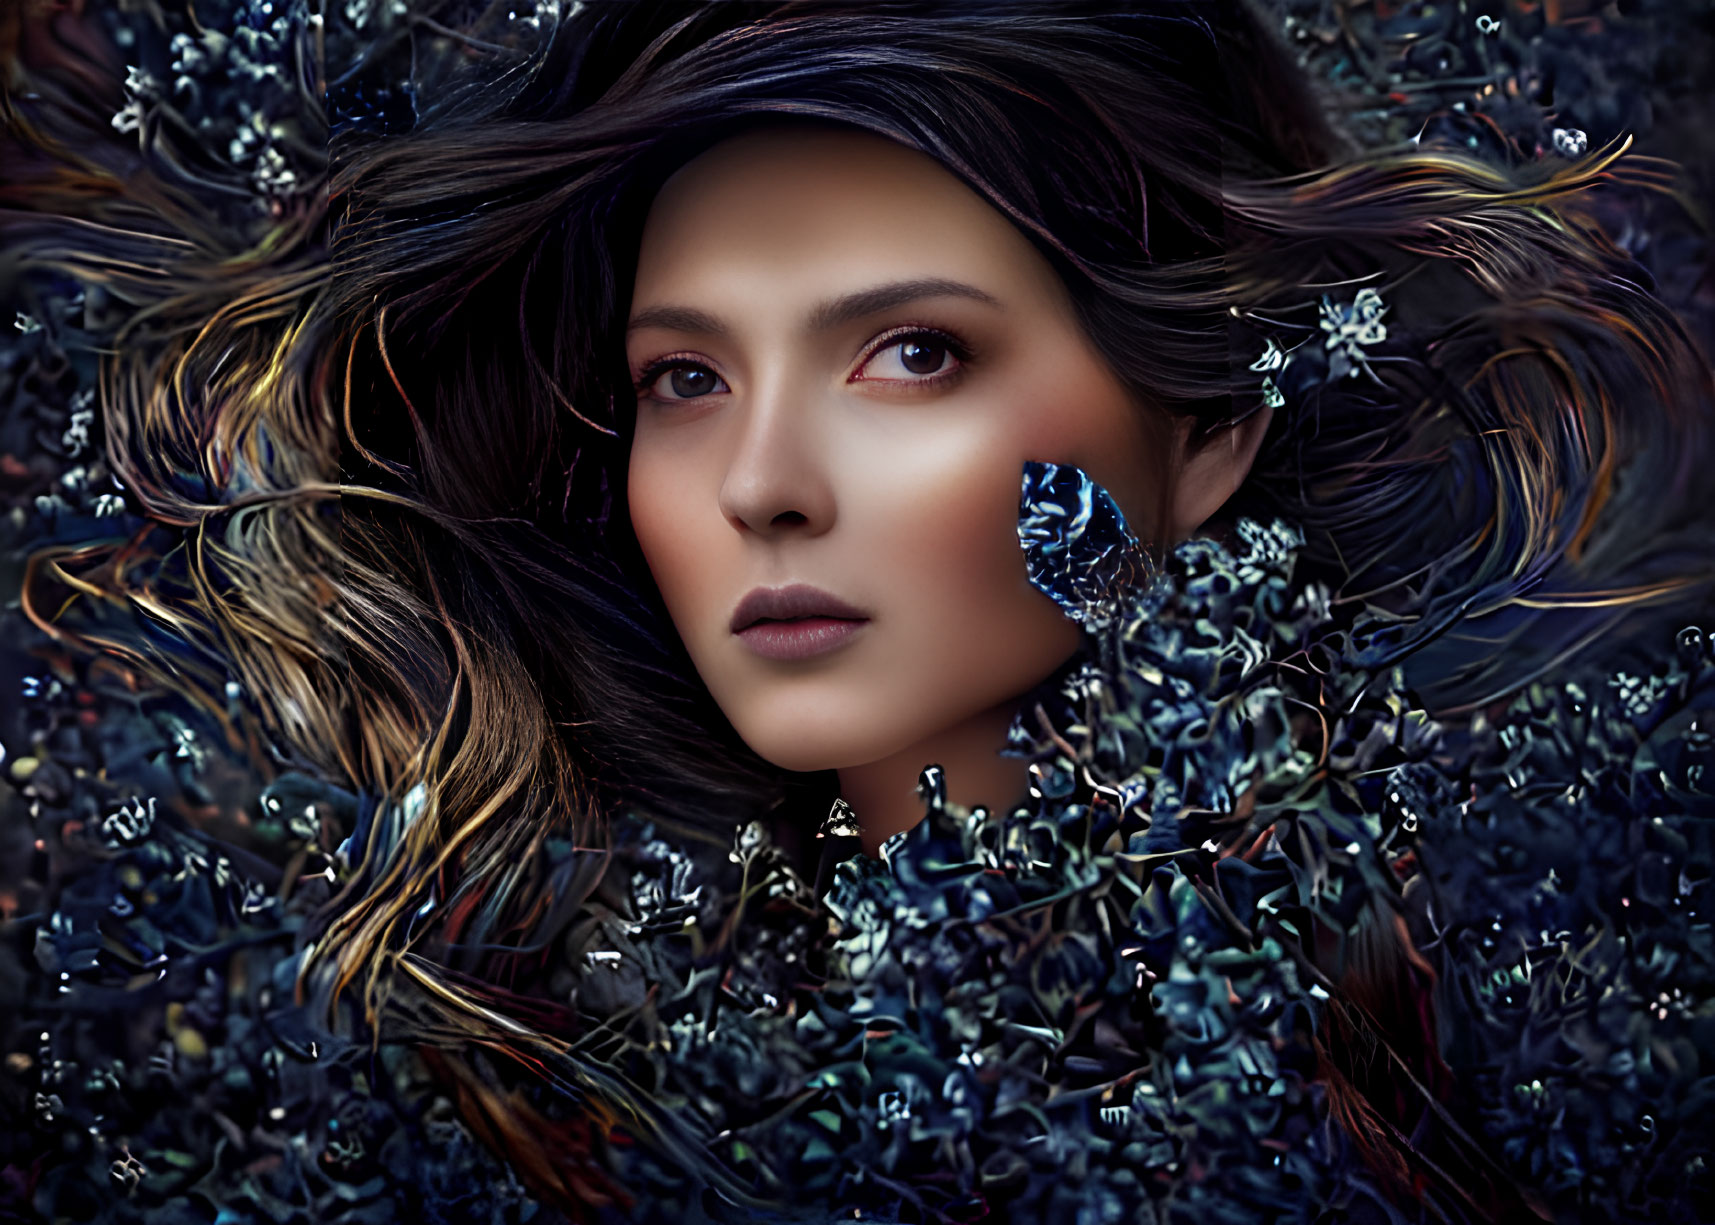 Woman surrounded by mystical flowers and butterfly, hair intertwined.